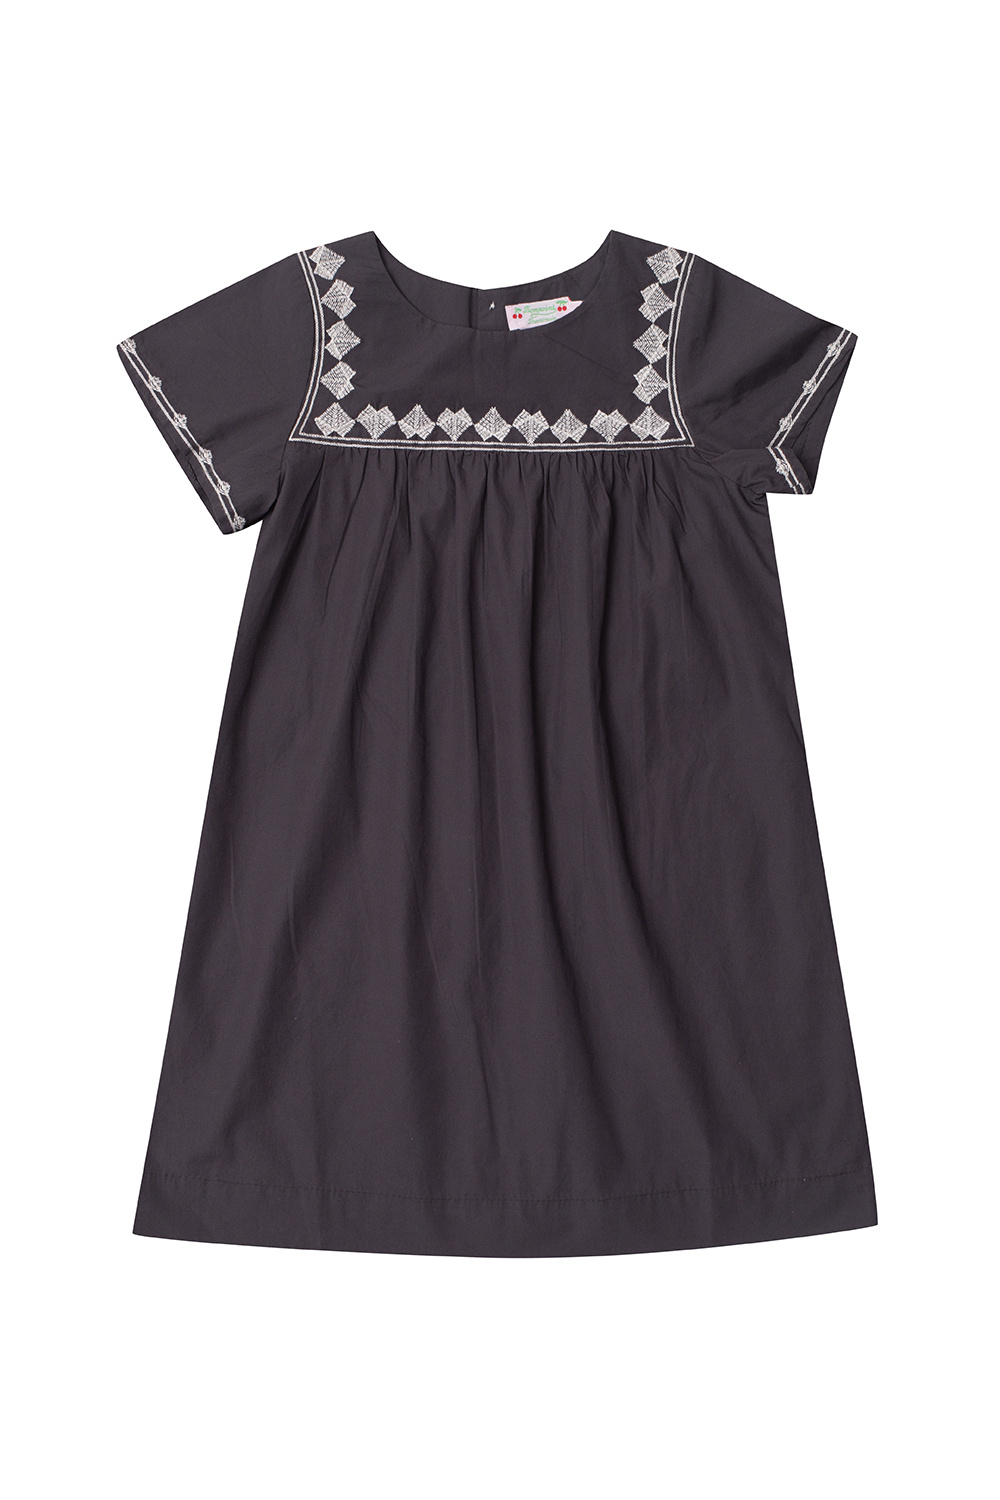 Bonpoint  Embroidered dress